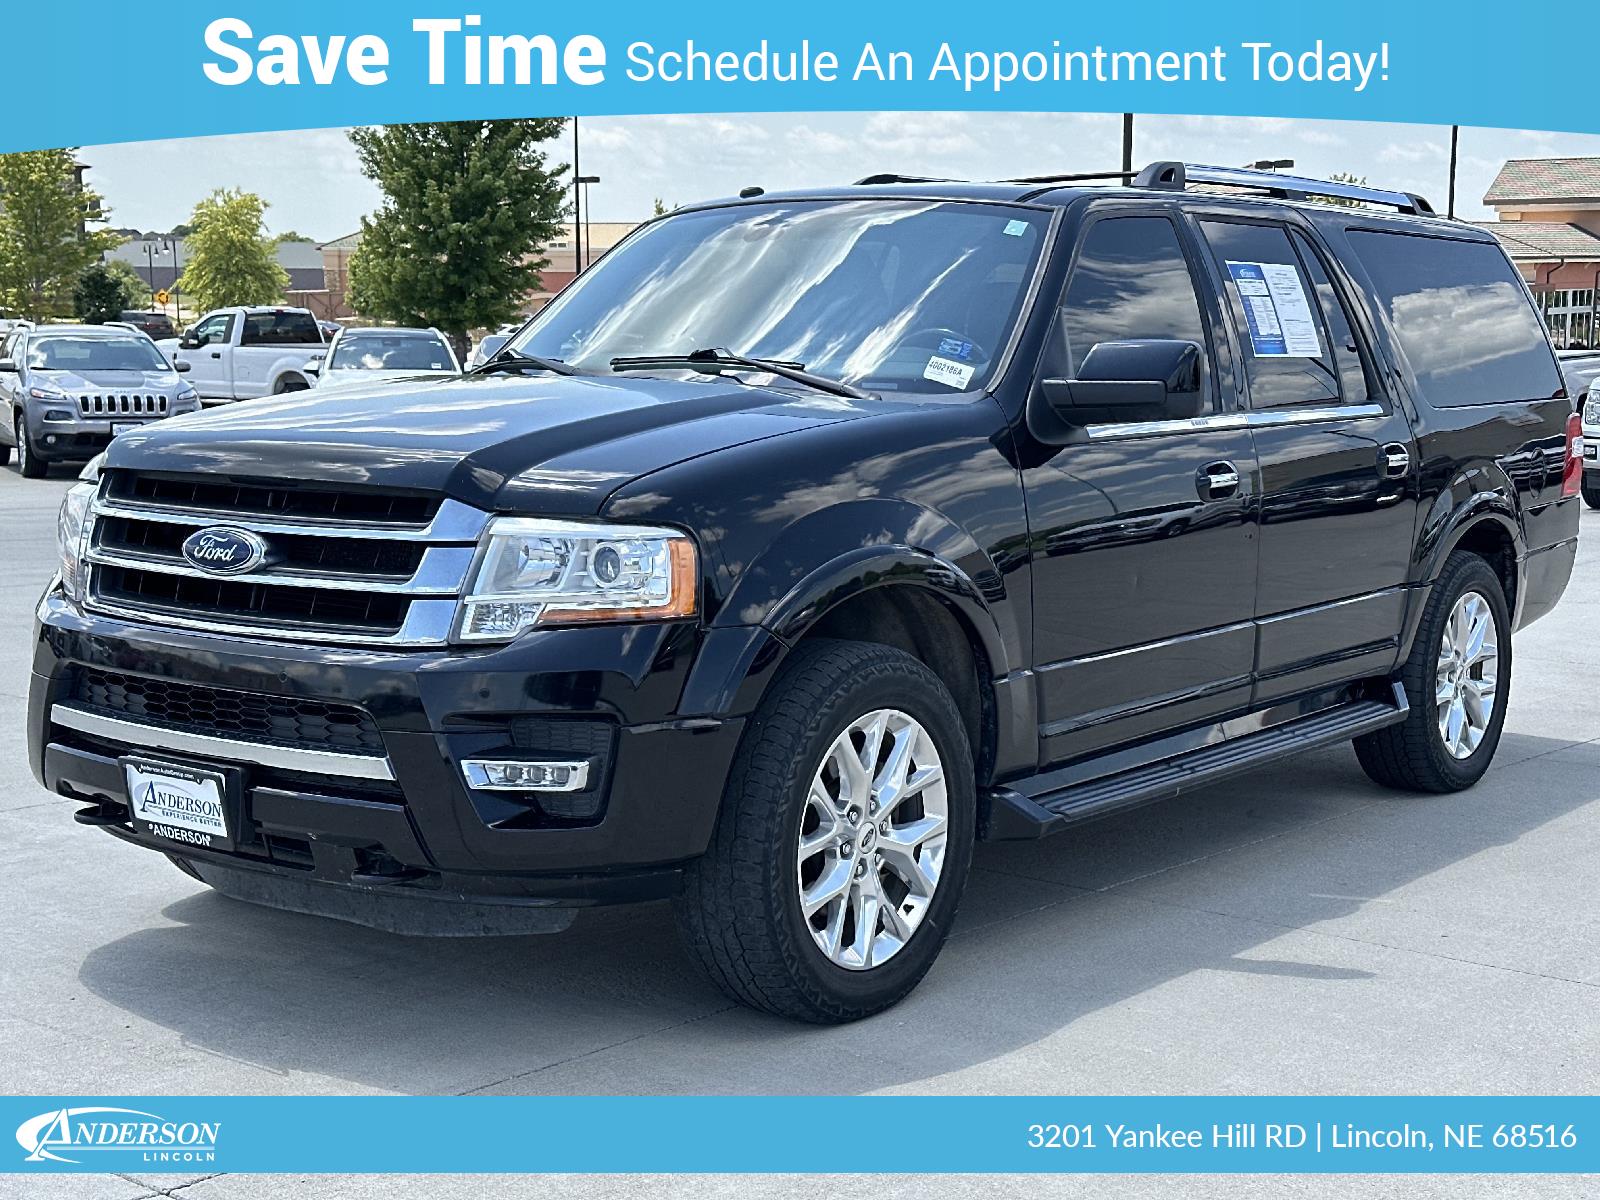 Used 2017 Ford Expedition EL Limited Stock: 4002186A